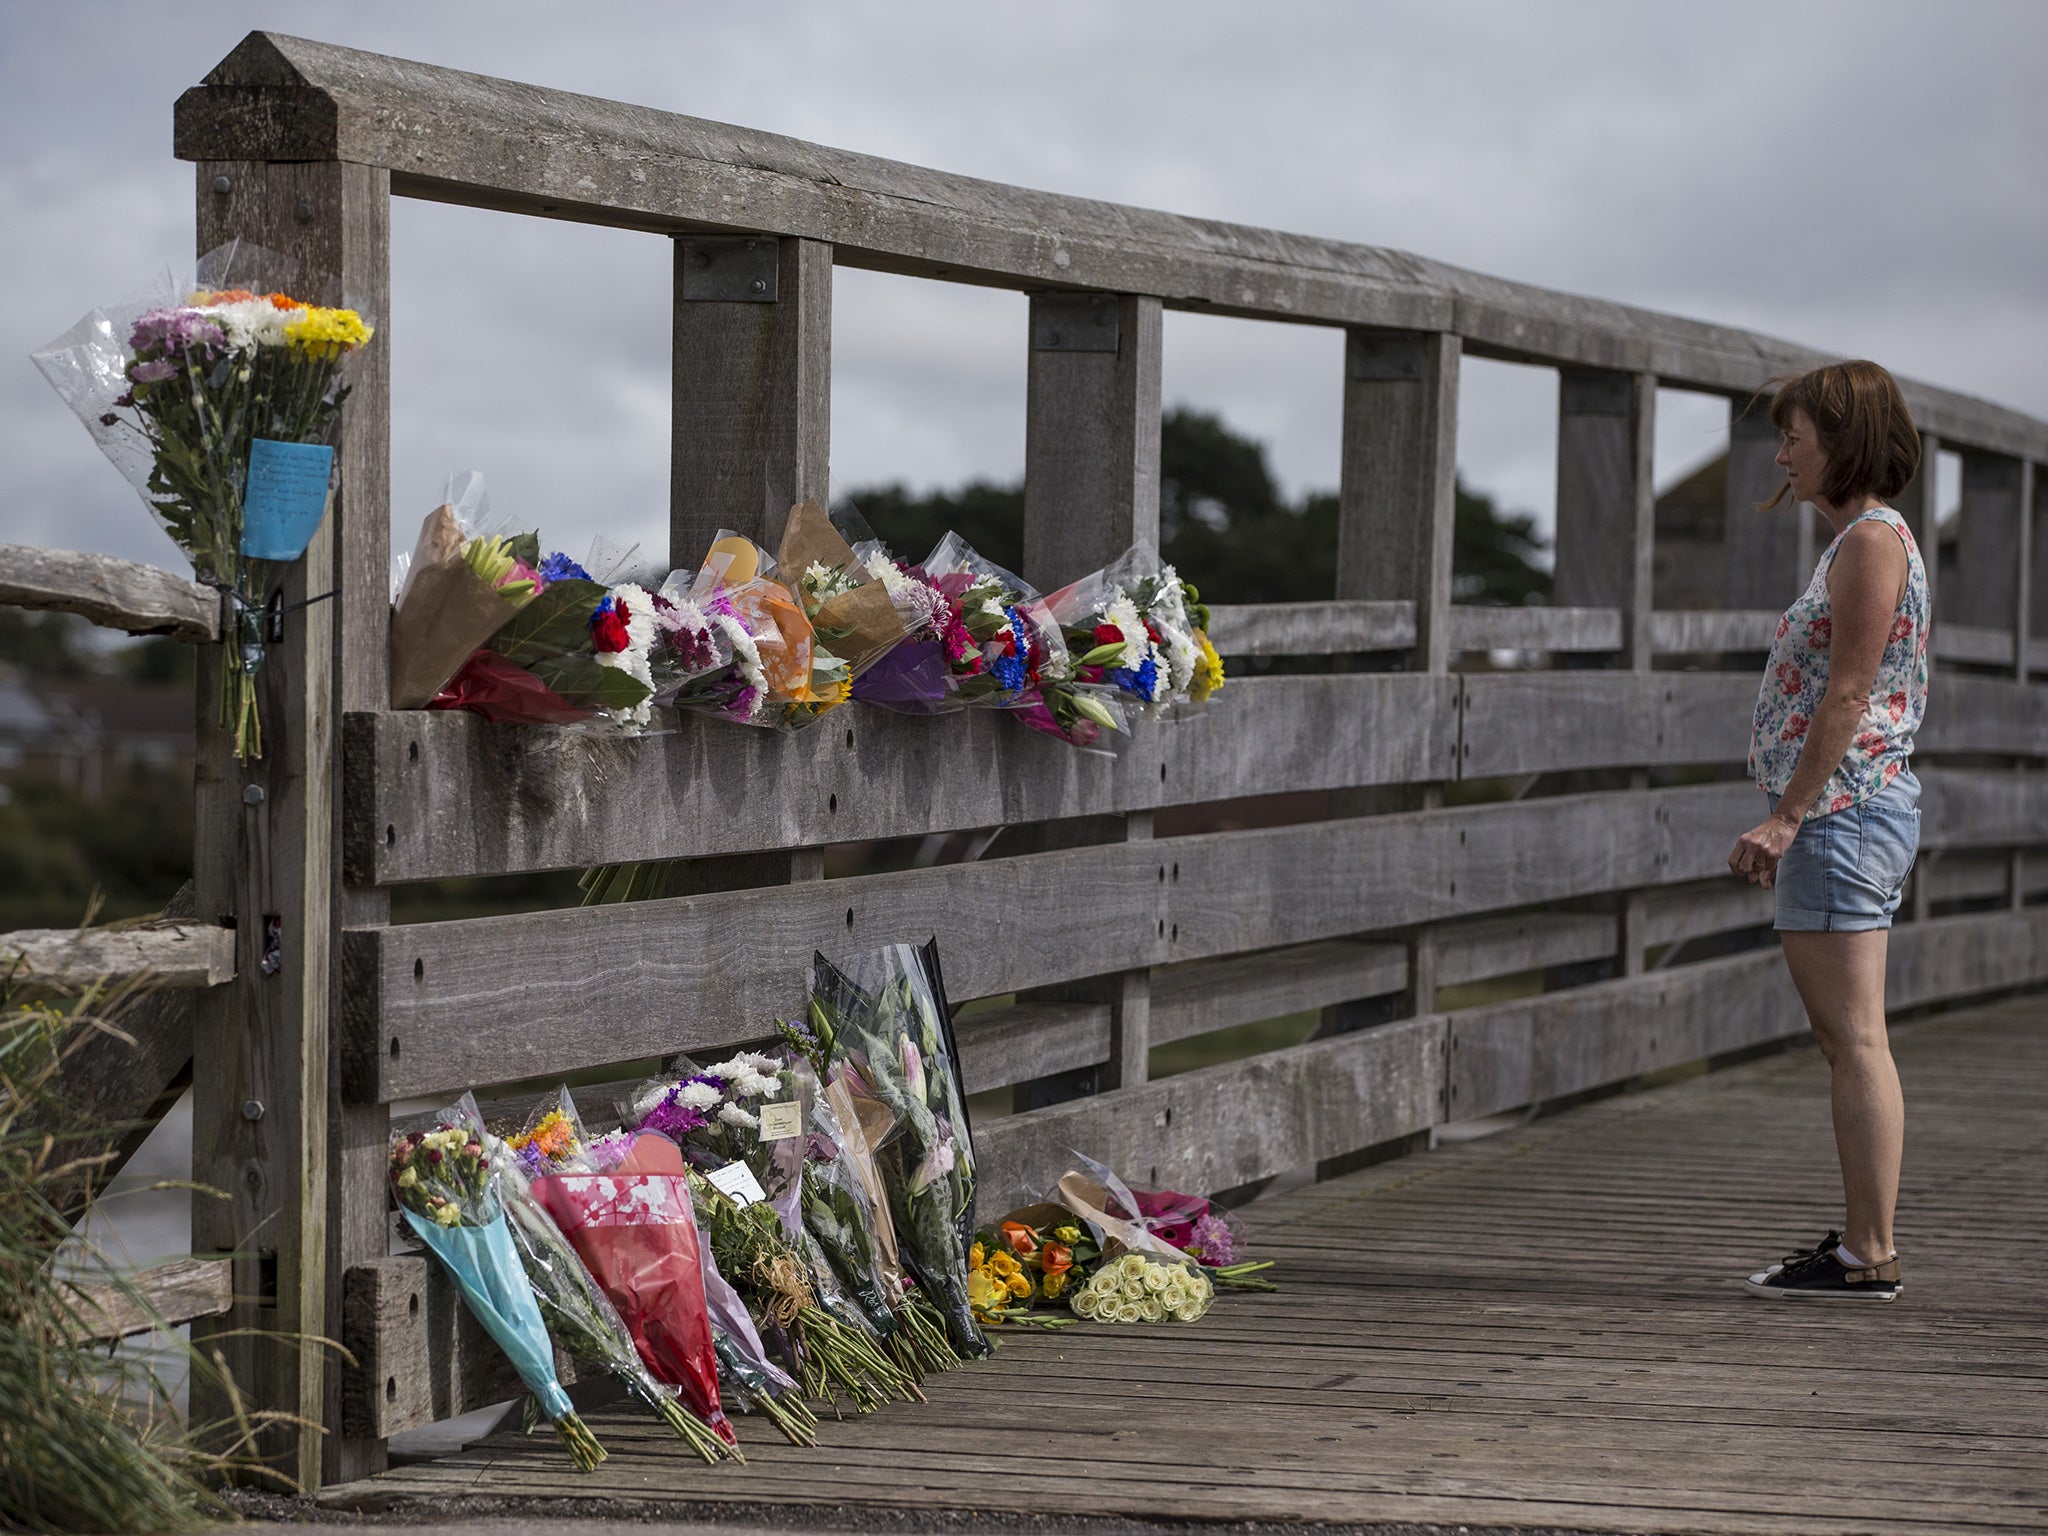 A woman lays flowers near the site where a Hawker Hunter fighter jet crashed on August 23, 2015 in Shoreham, England